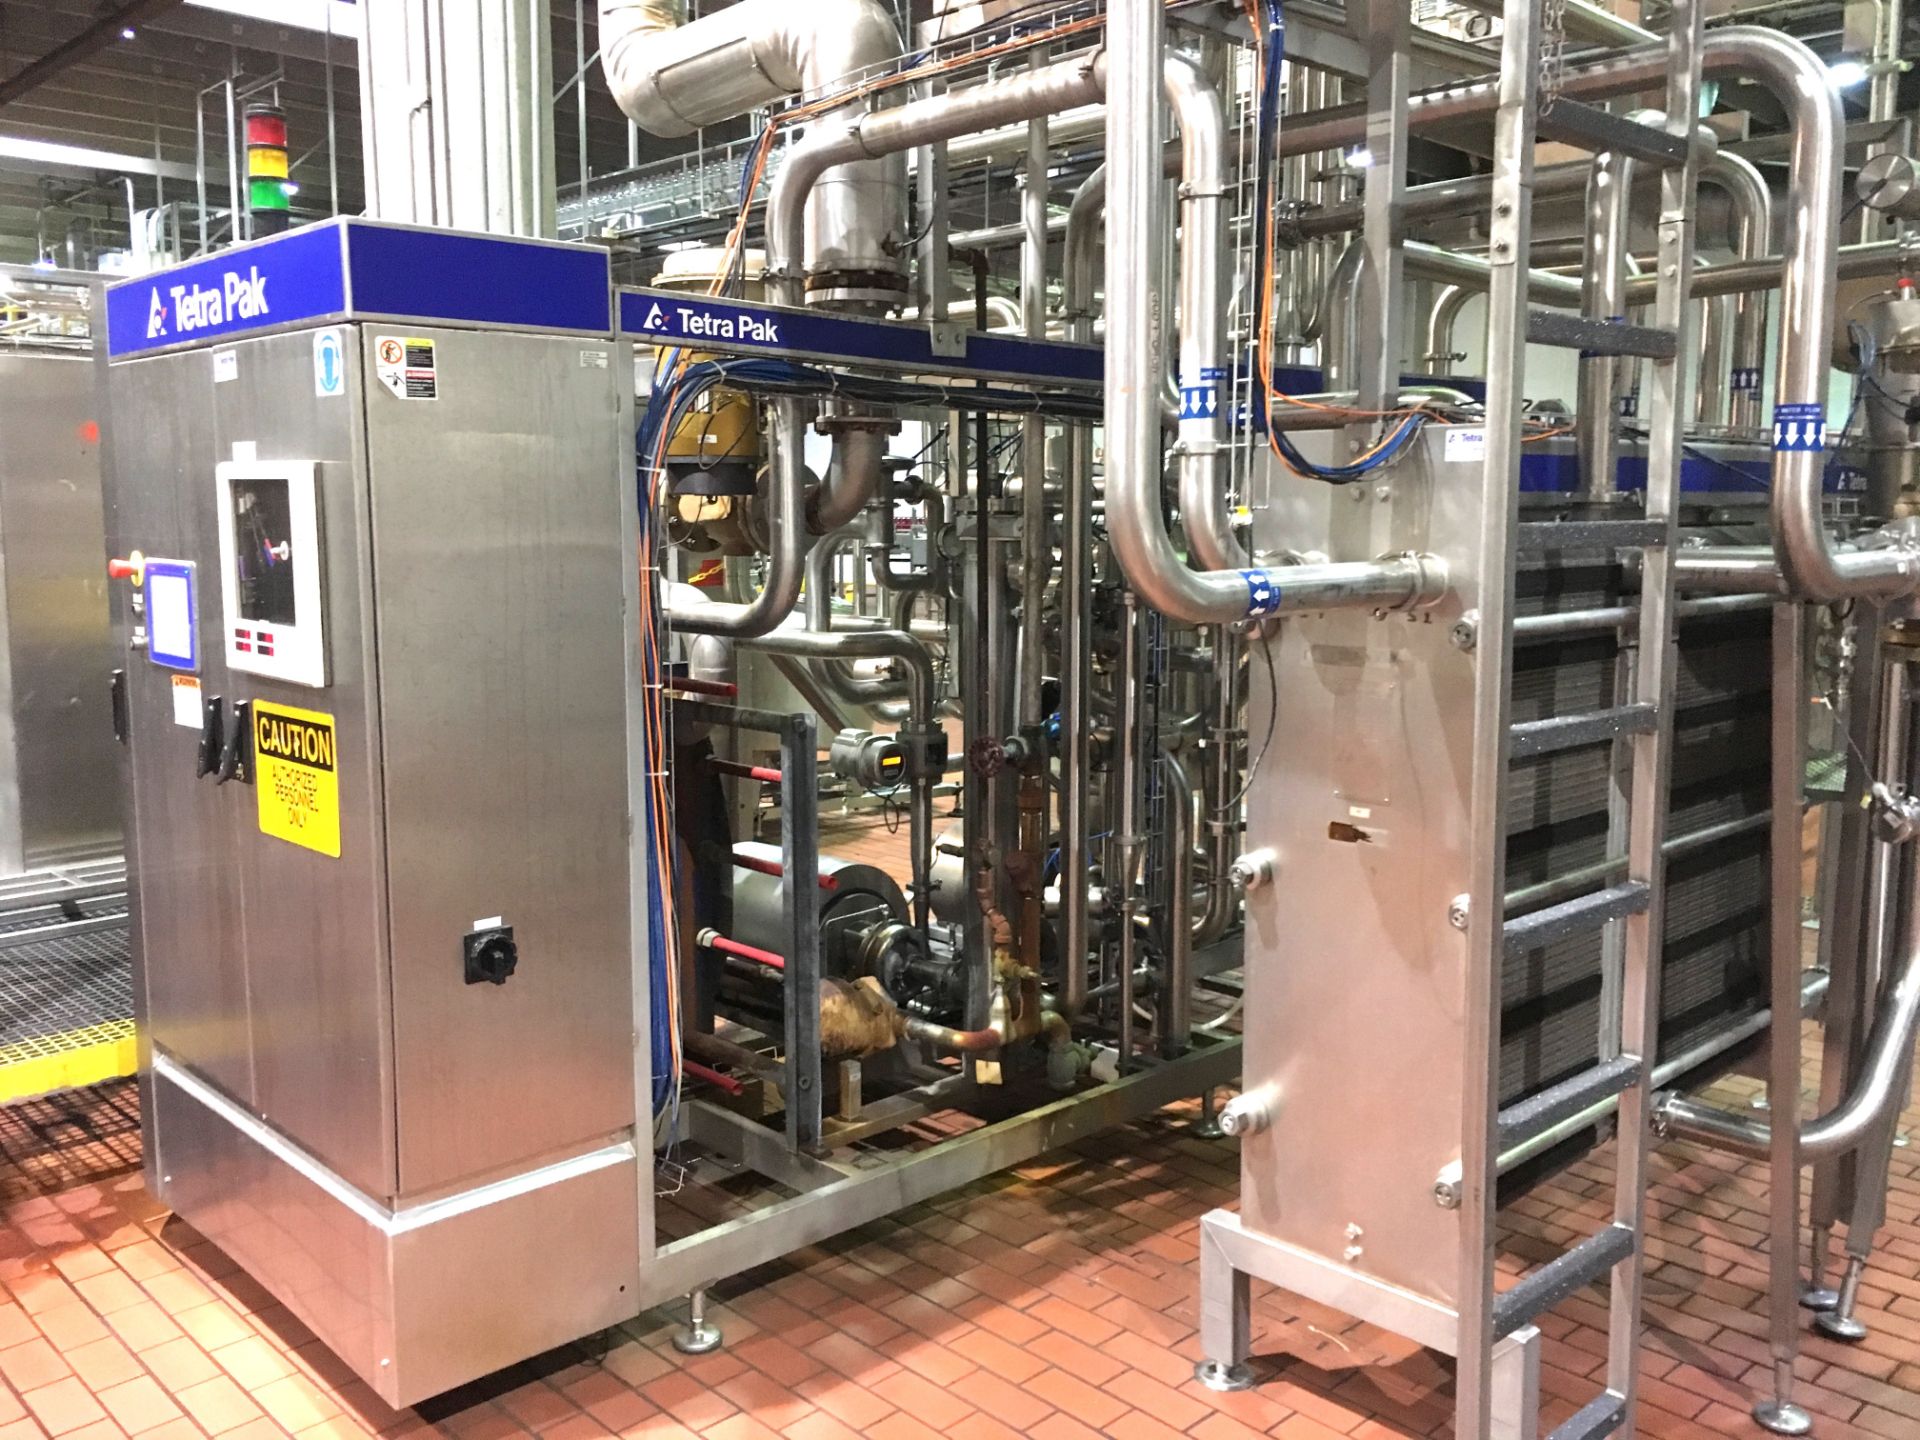 2007 Tetra Pak Skid Mounted HTST Pasteurization System - Rated for 100 GPM - Single Serve Line